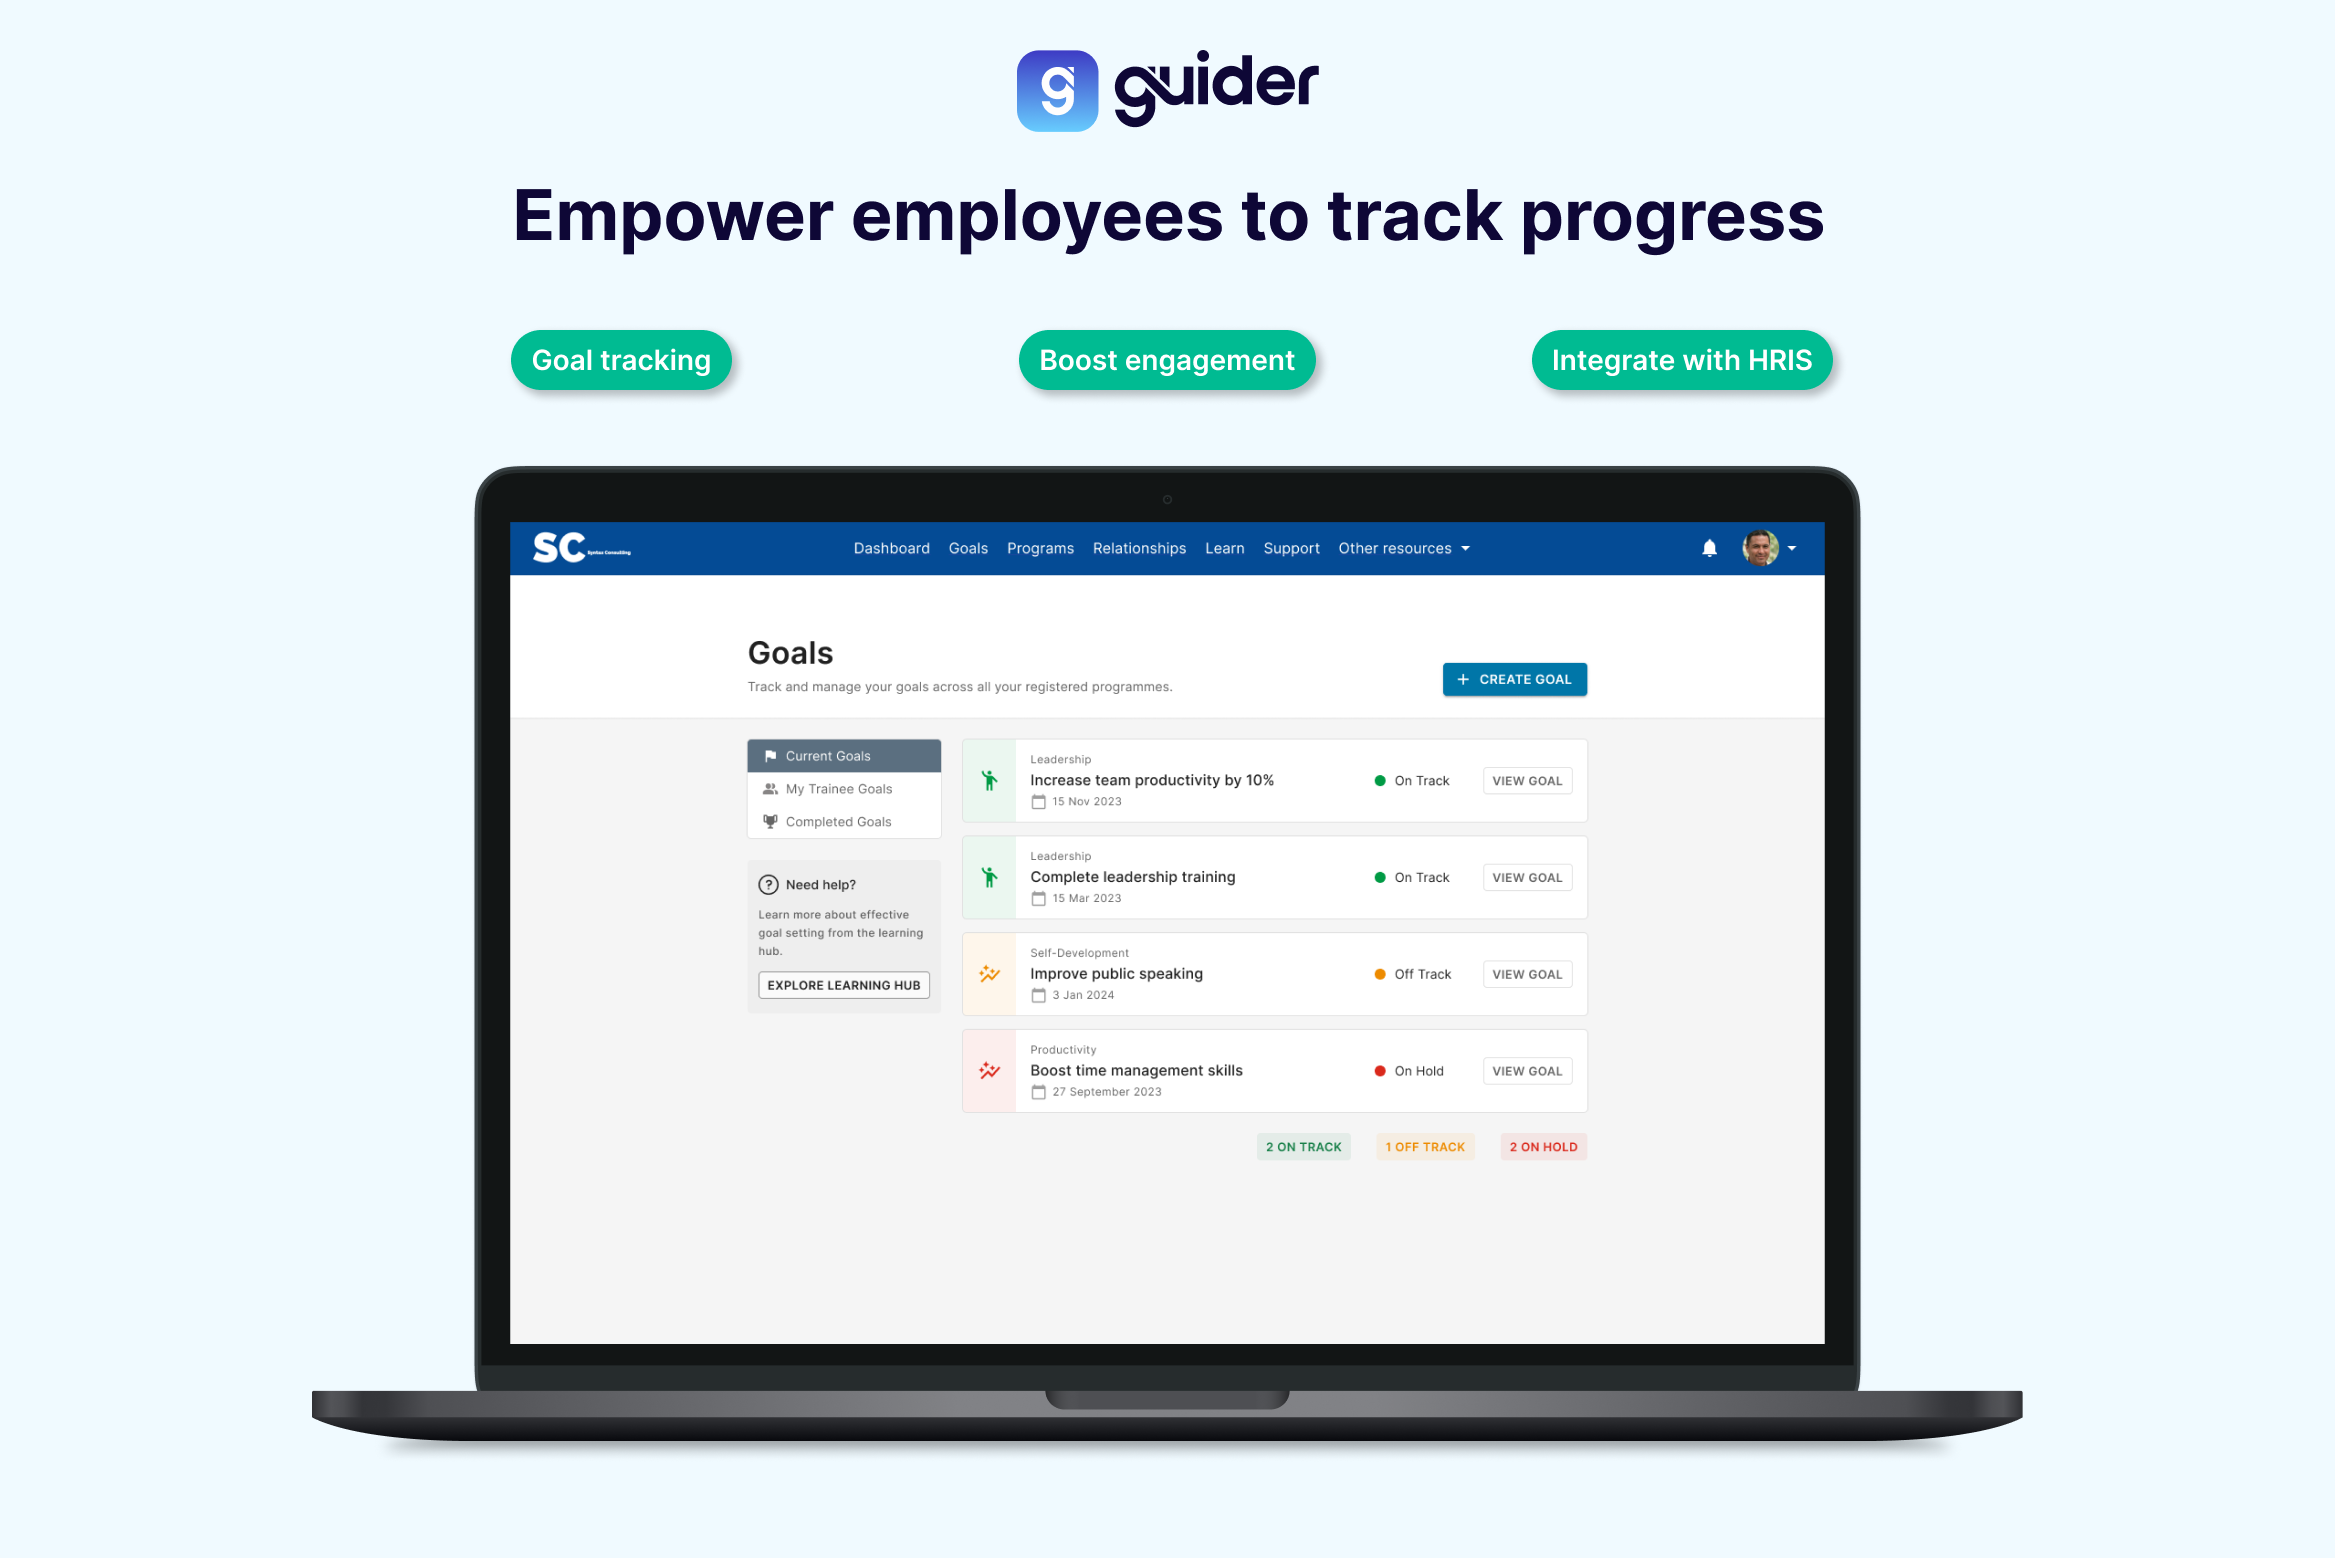 Give your employees the tools they need to track their L&D progress, with custom goal creation that their mentors can help them track, stay accountable for, and most of all, beat.